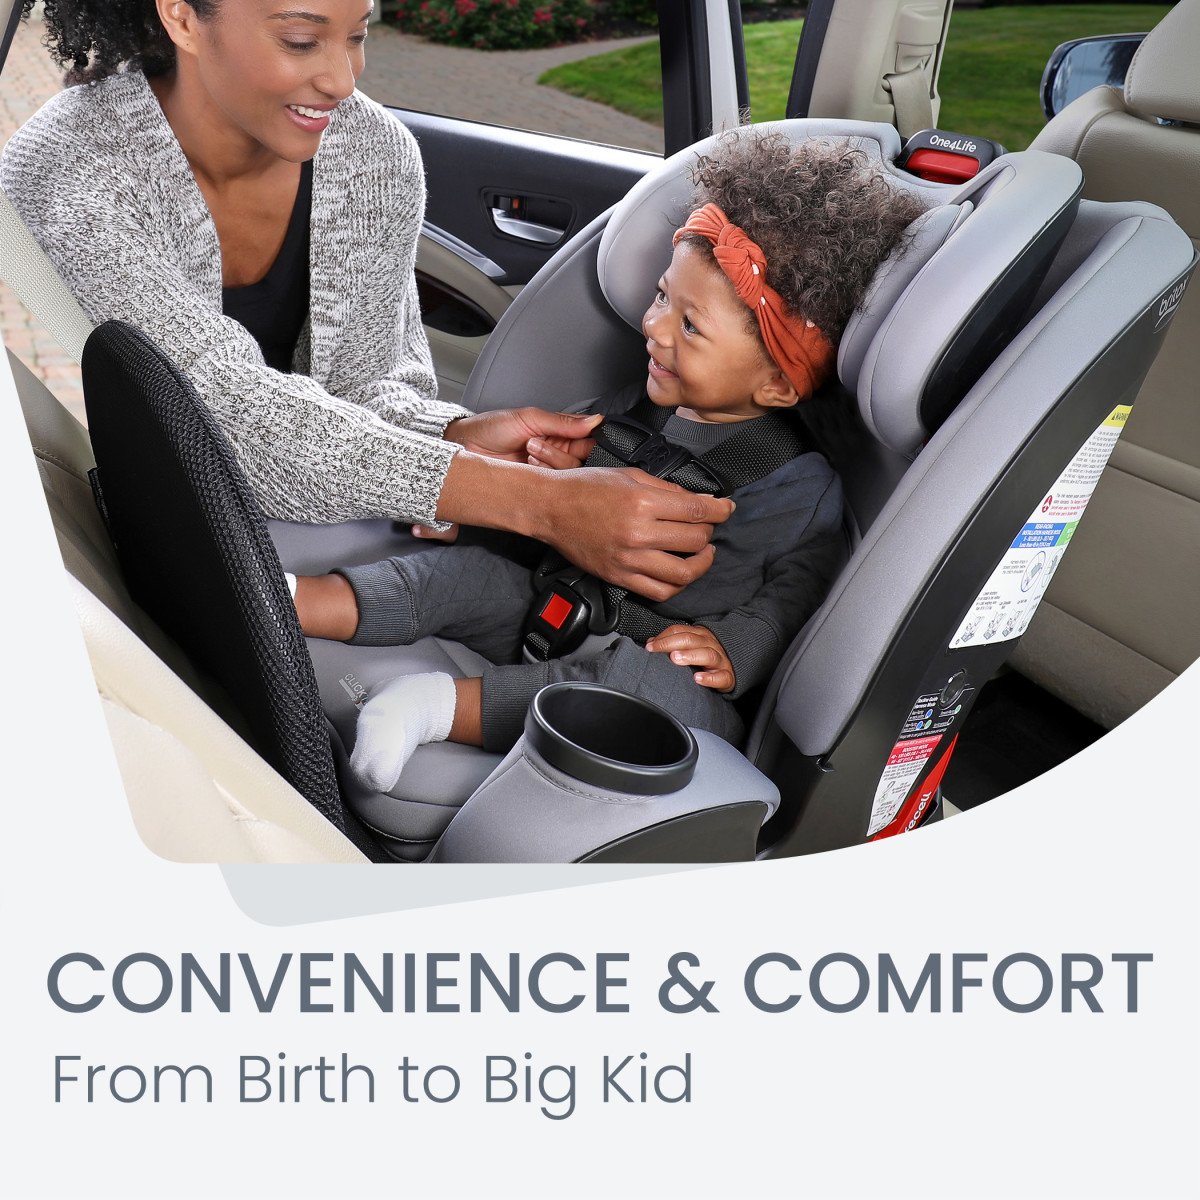 Mom adjusting the One4Life Car seat to her child